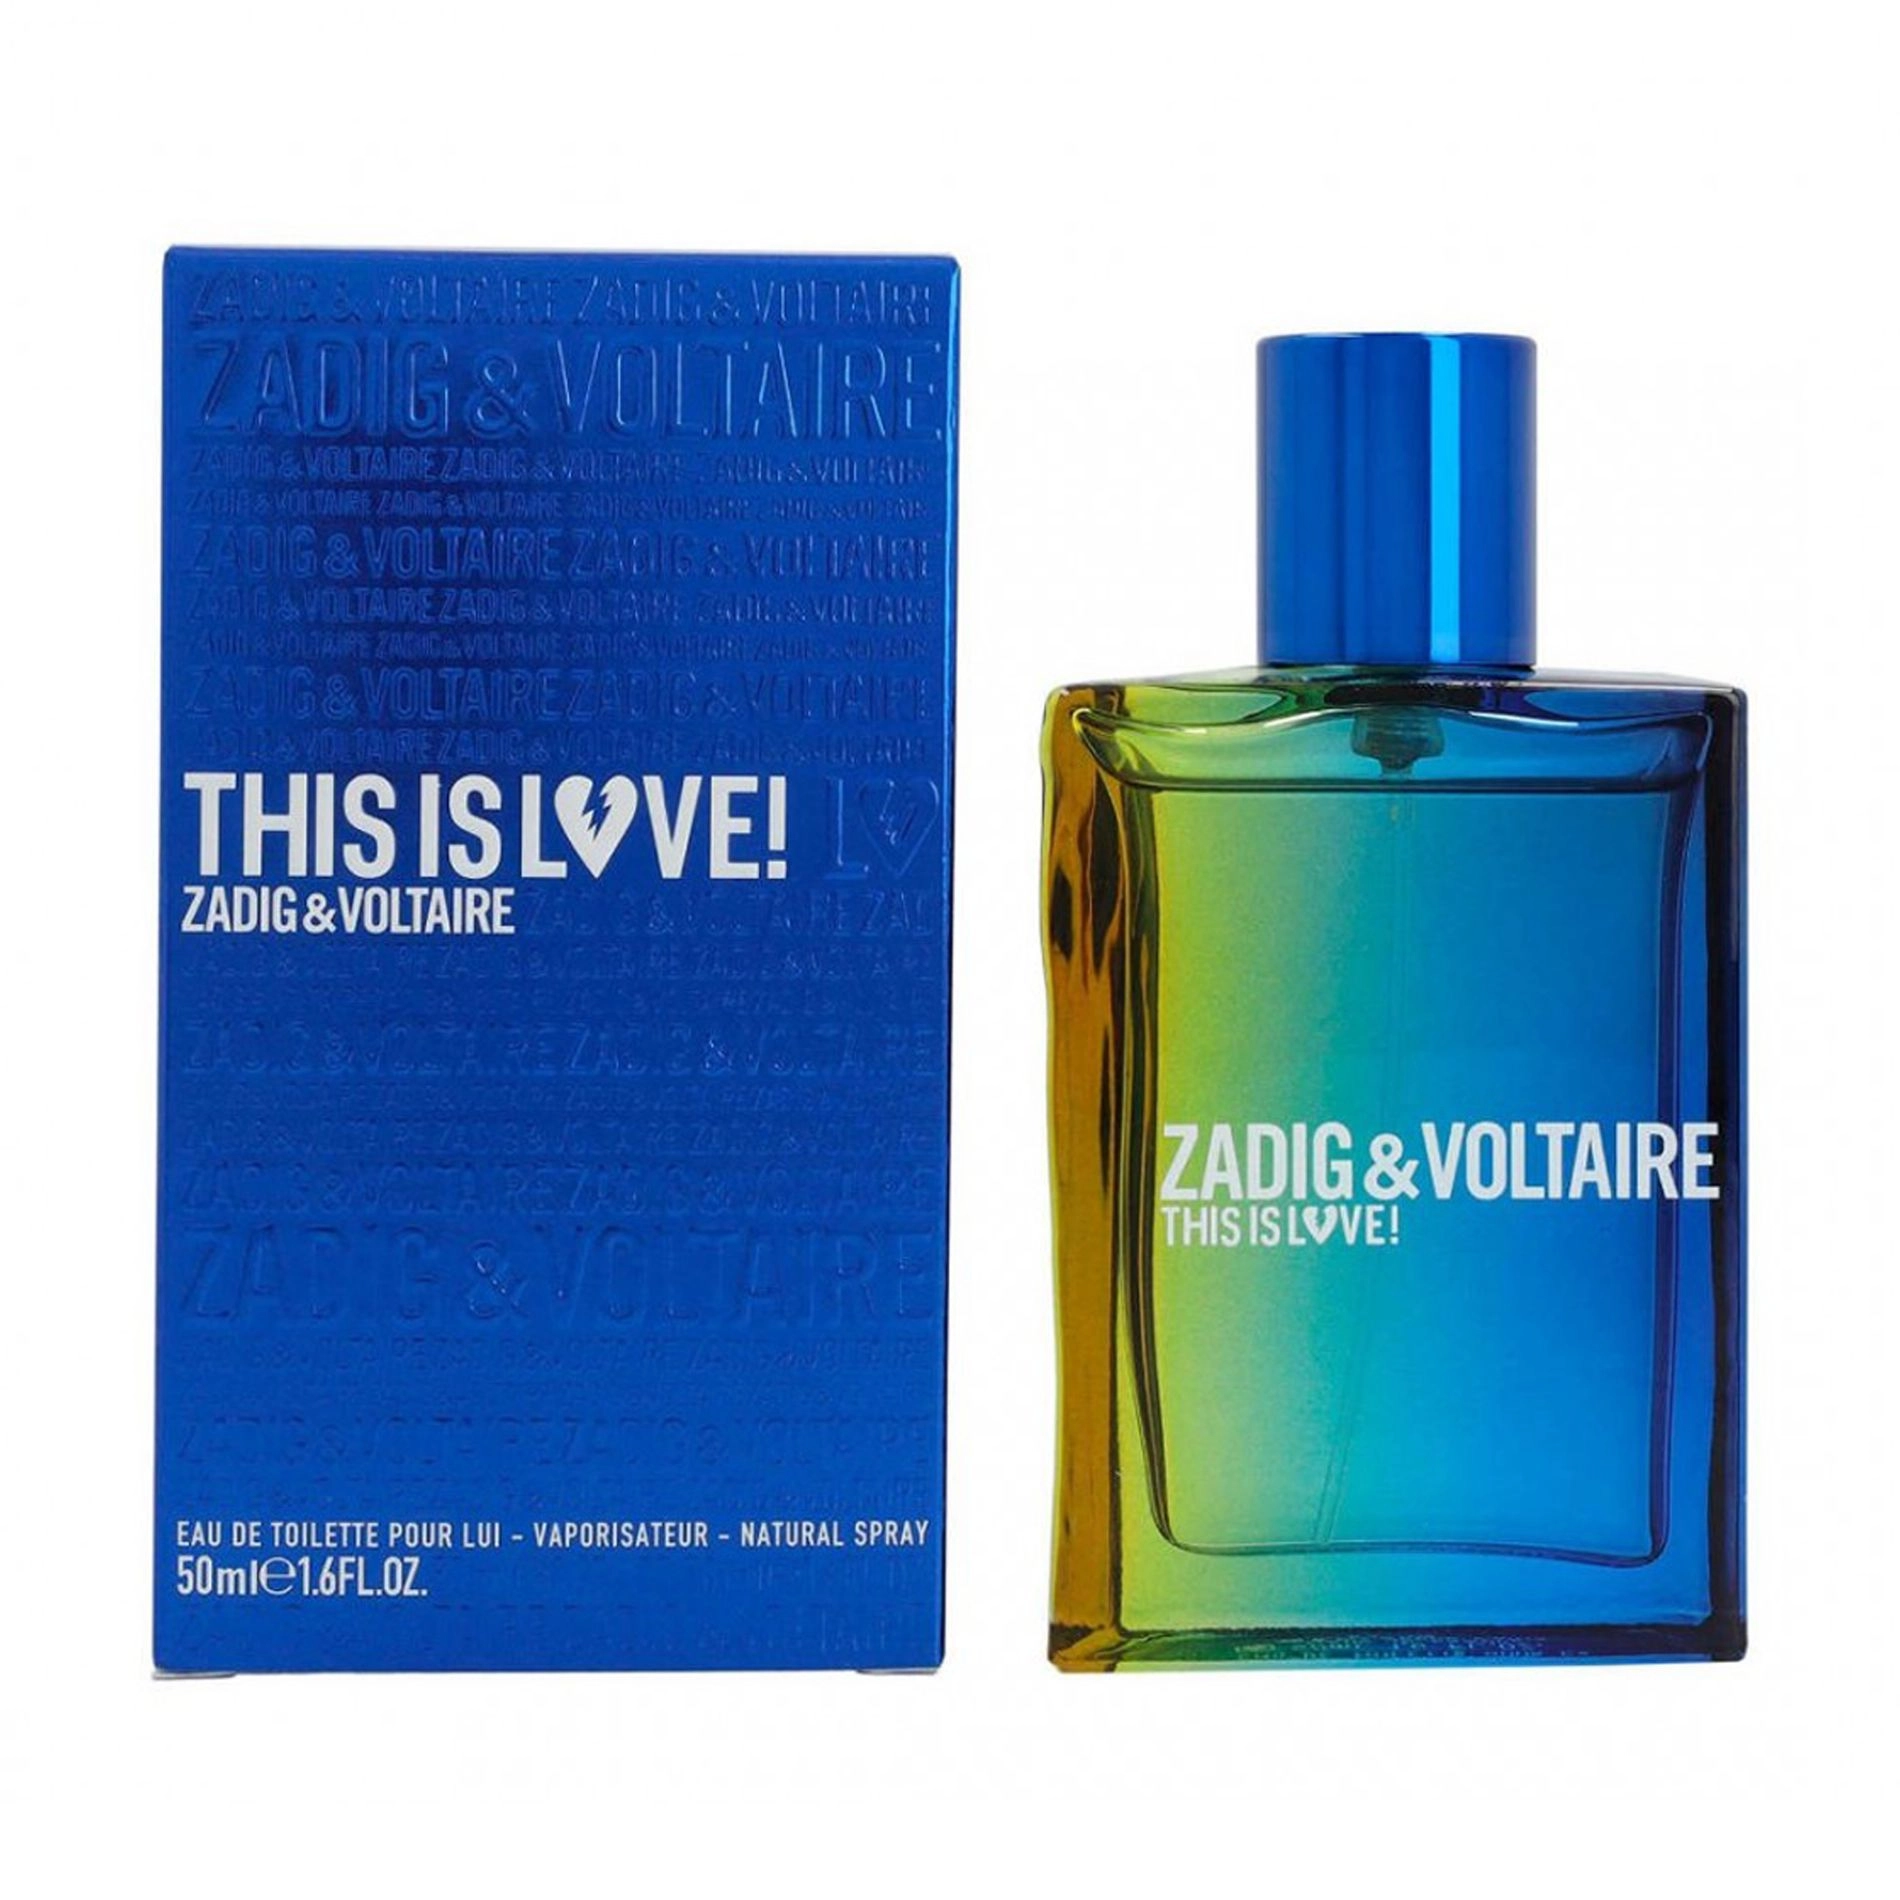 Zadig & Voltaire This is Love! for Him Туалетна вода чоловіча, 50 мл - фото N1